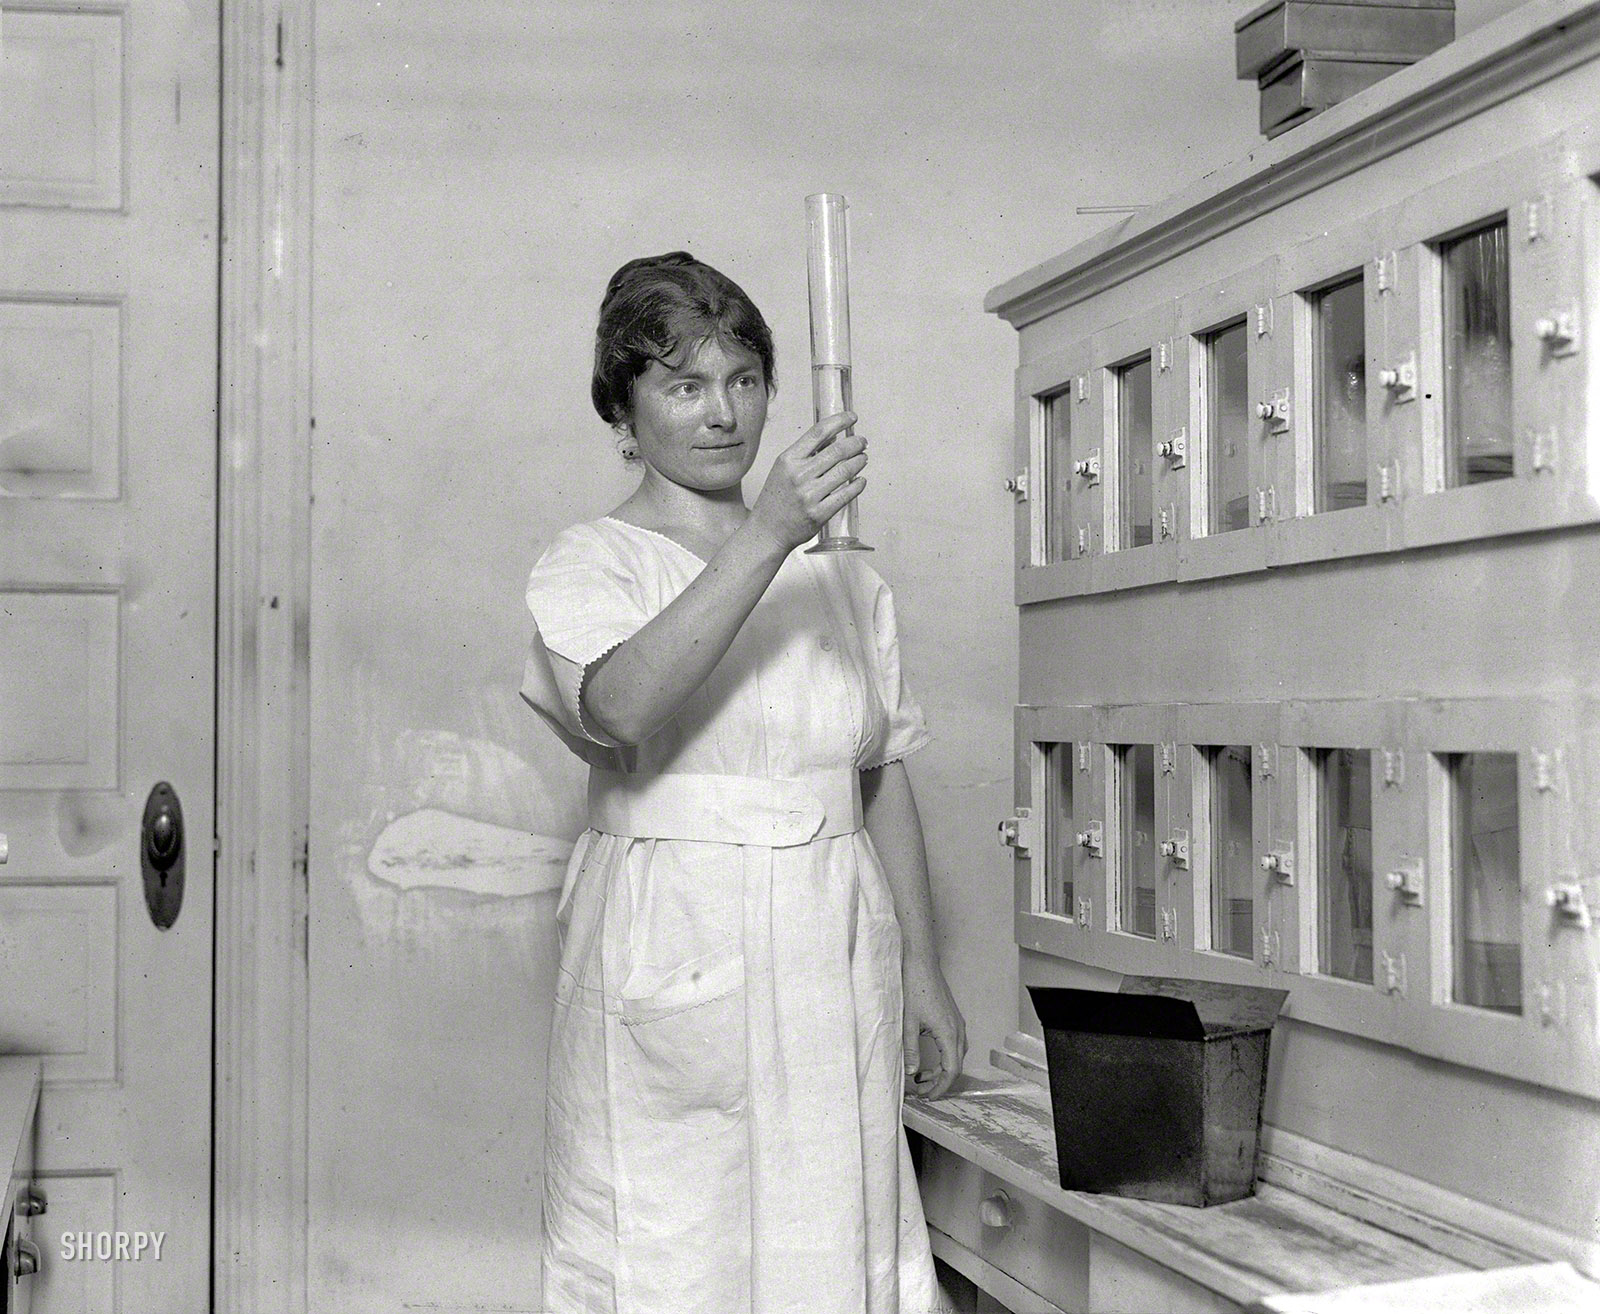 March 9, 1923. Washington, D.C. "Miss L.M. Alexander," possibly of the Department of Agriculture. National Photo glass negative. View full size.